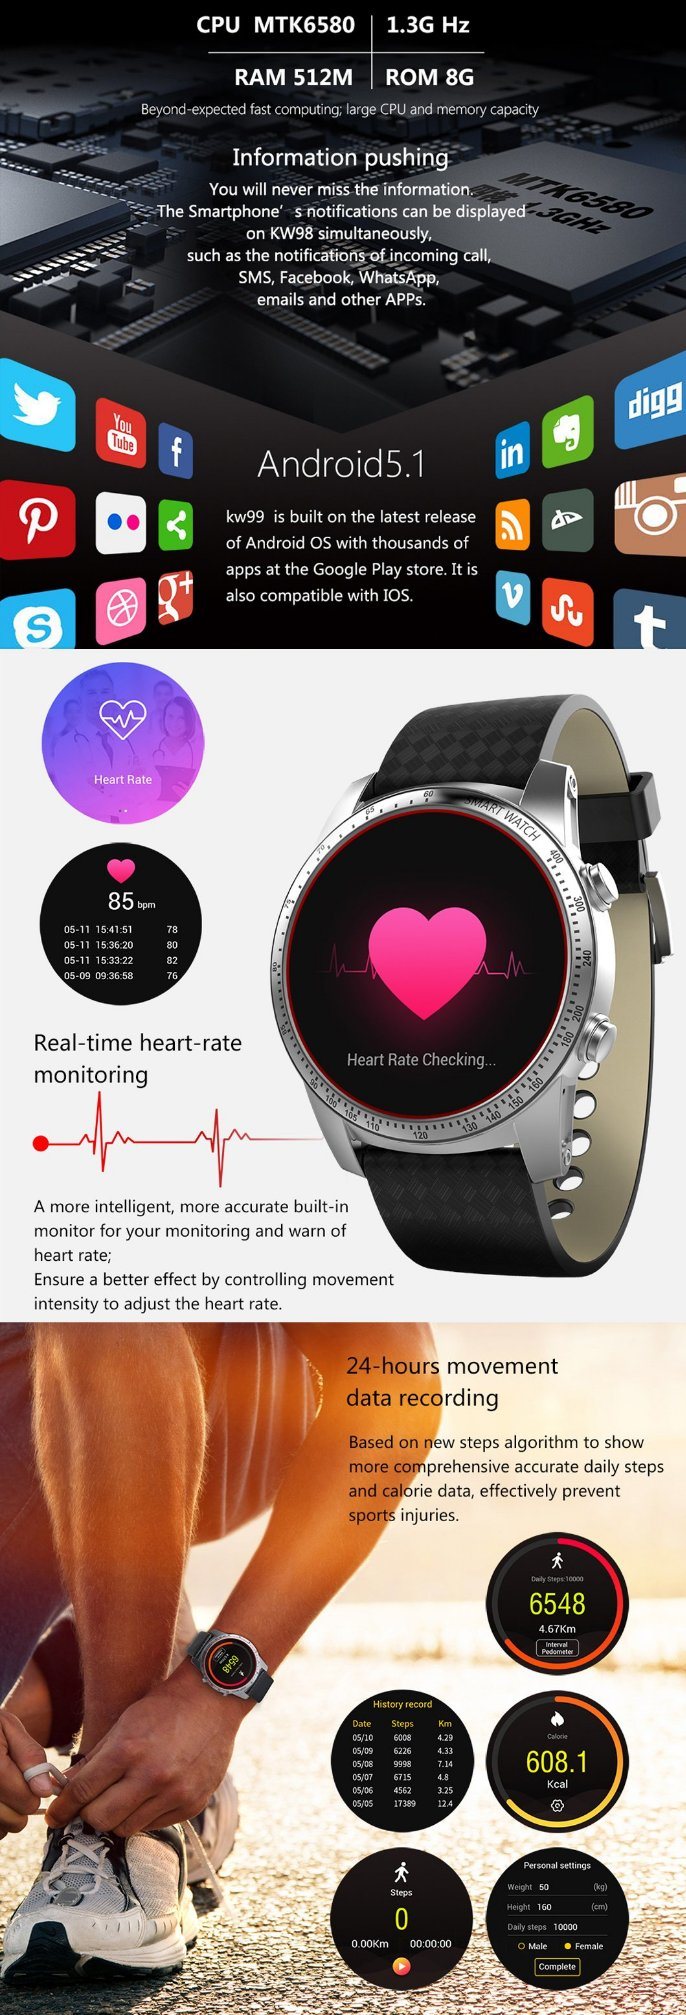 Android 5.1 Luxury 3G GPS Pedometer Smart Watch Kw99 with Heart Rate Monitor Kw99